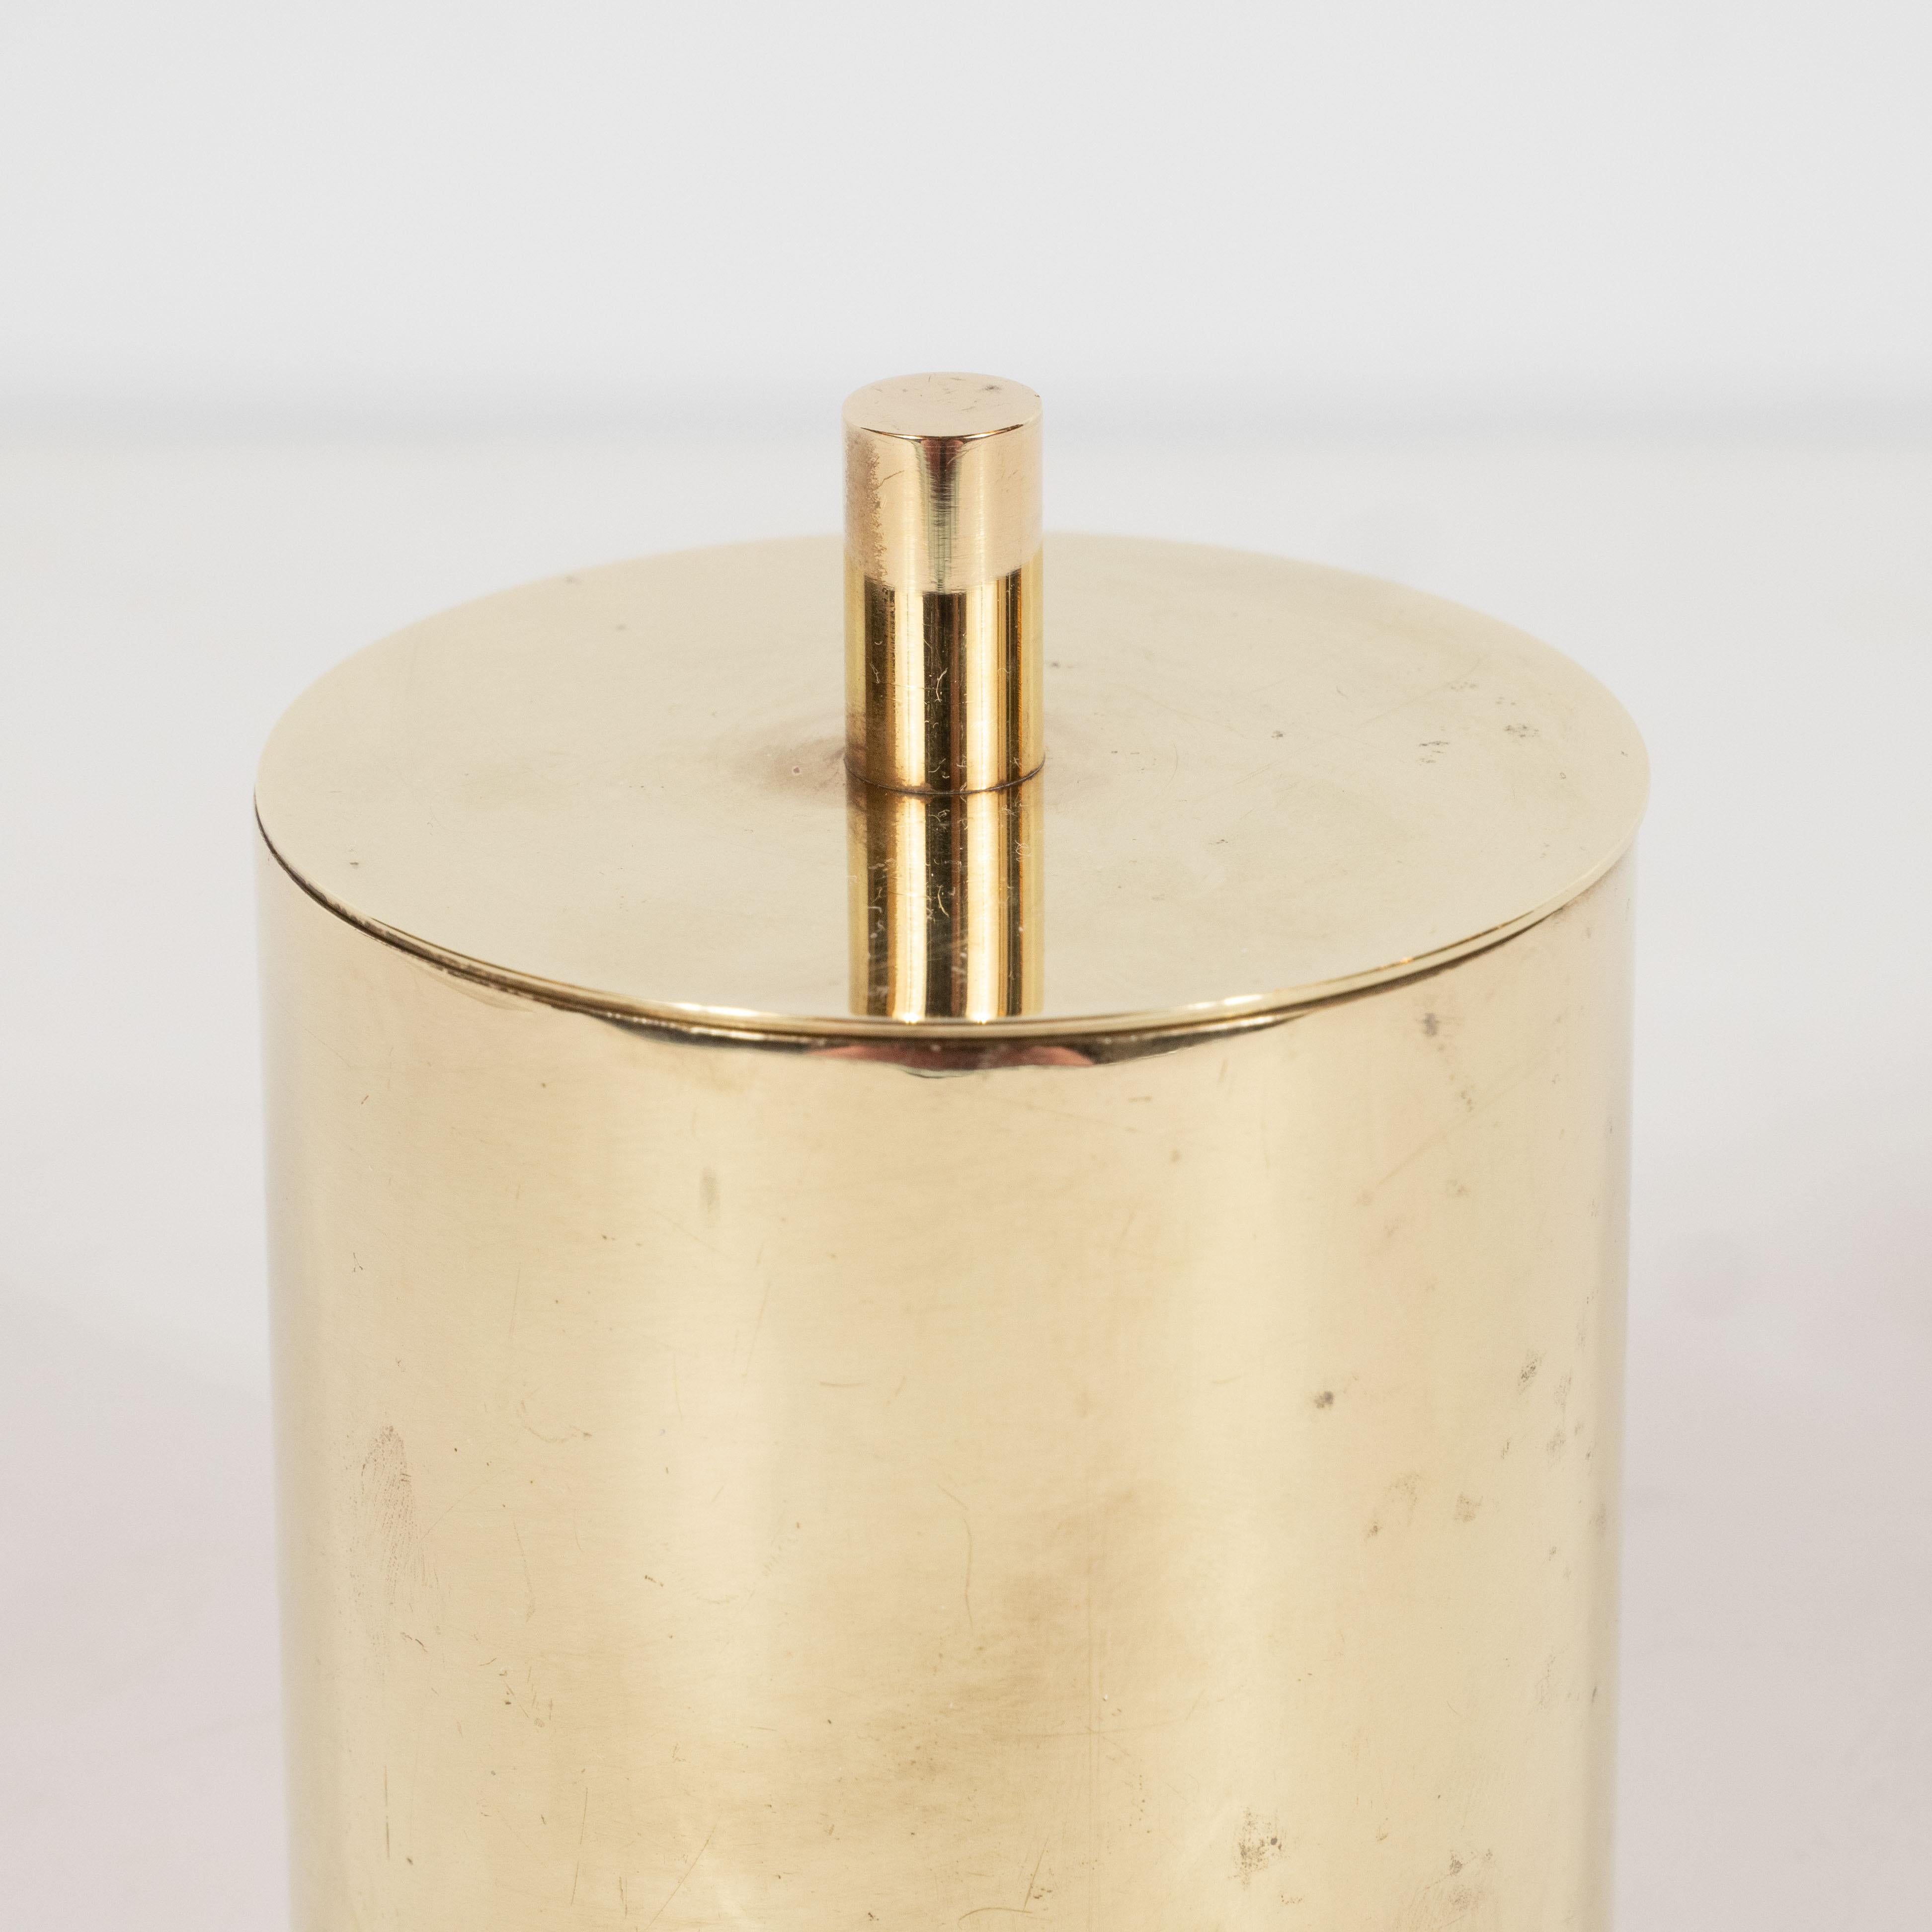 This refined Mid-Century Modern box was realized by the esteemed maker, Arredoluce, circa 1960. It features a cylindrical body with a circular top embellished with a finial that reiterates the form of the body in miniature. Replicating the form of